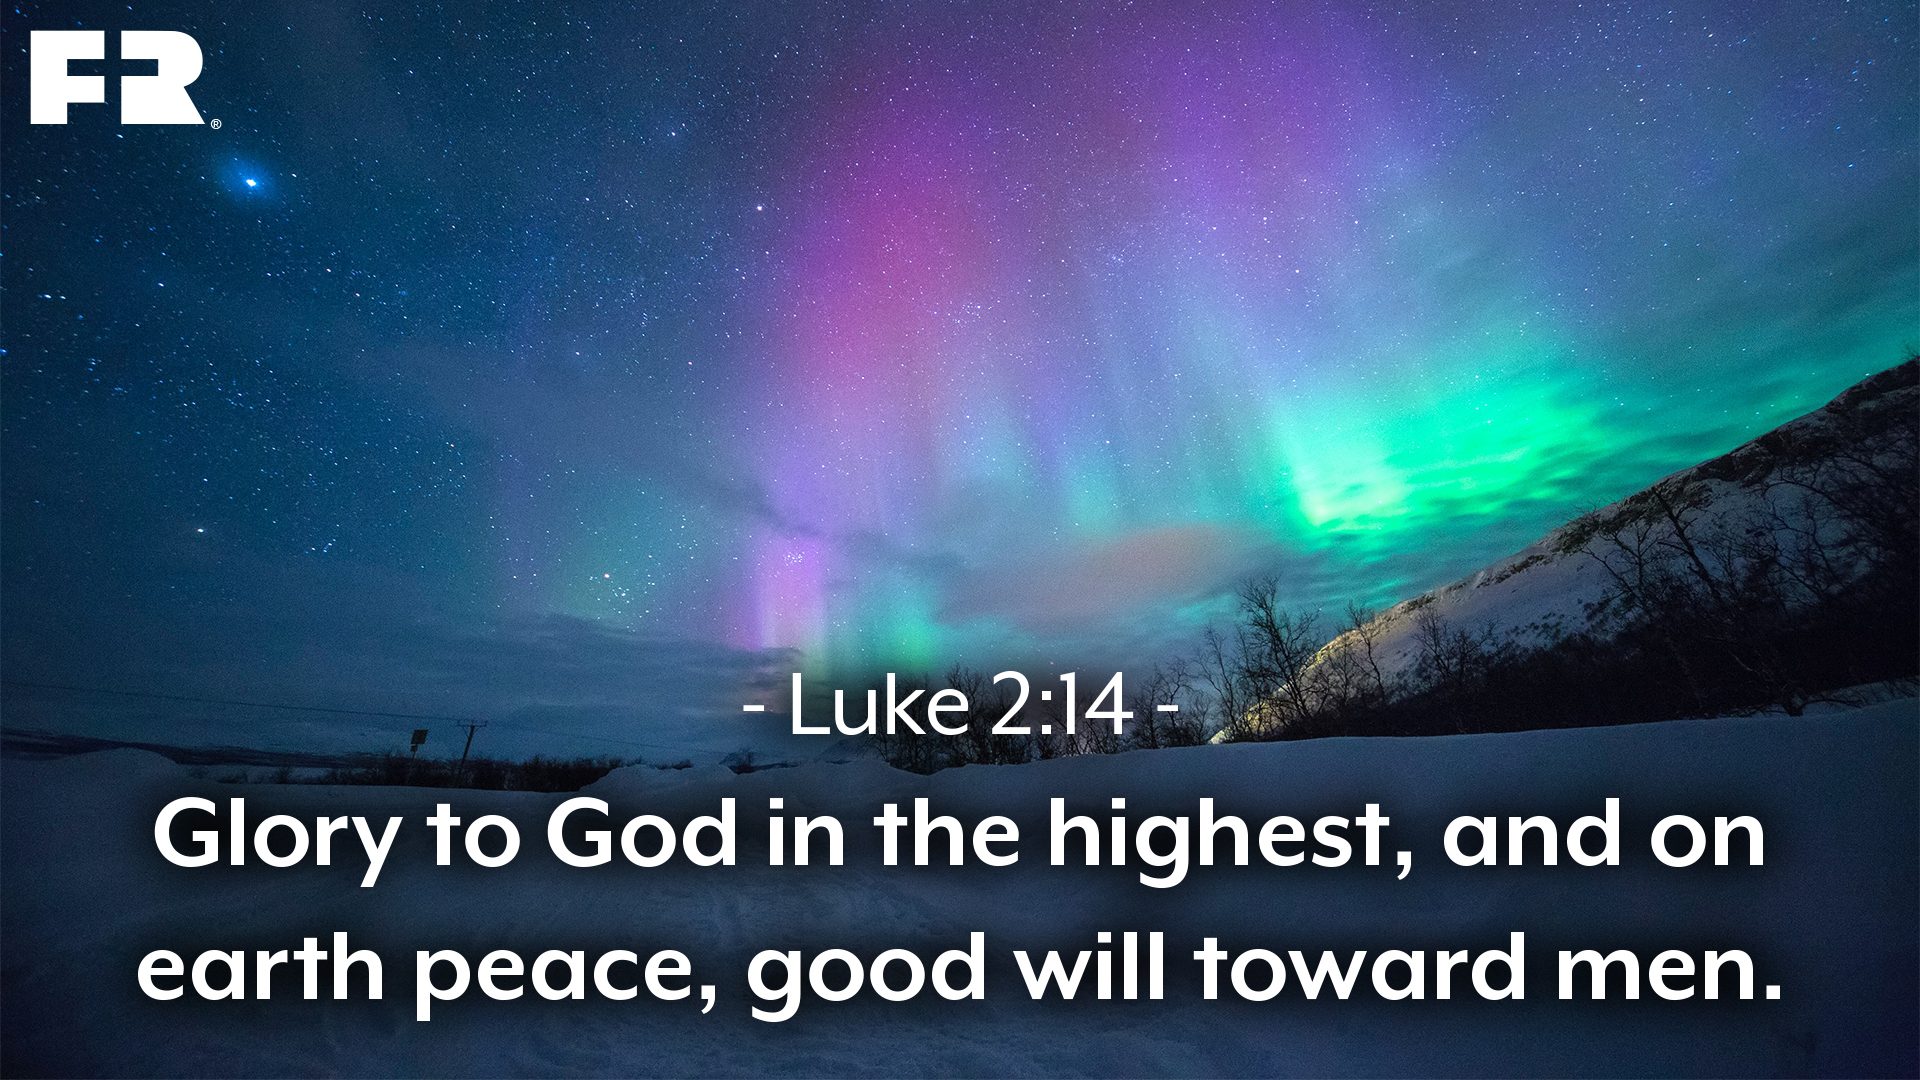 <em>“Glory to God in the highest, and on earth peace, good will toward men.”</em>